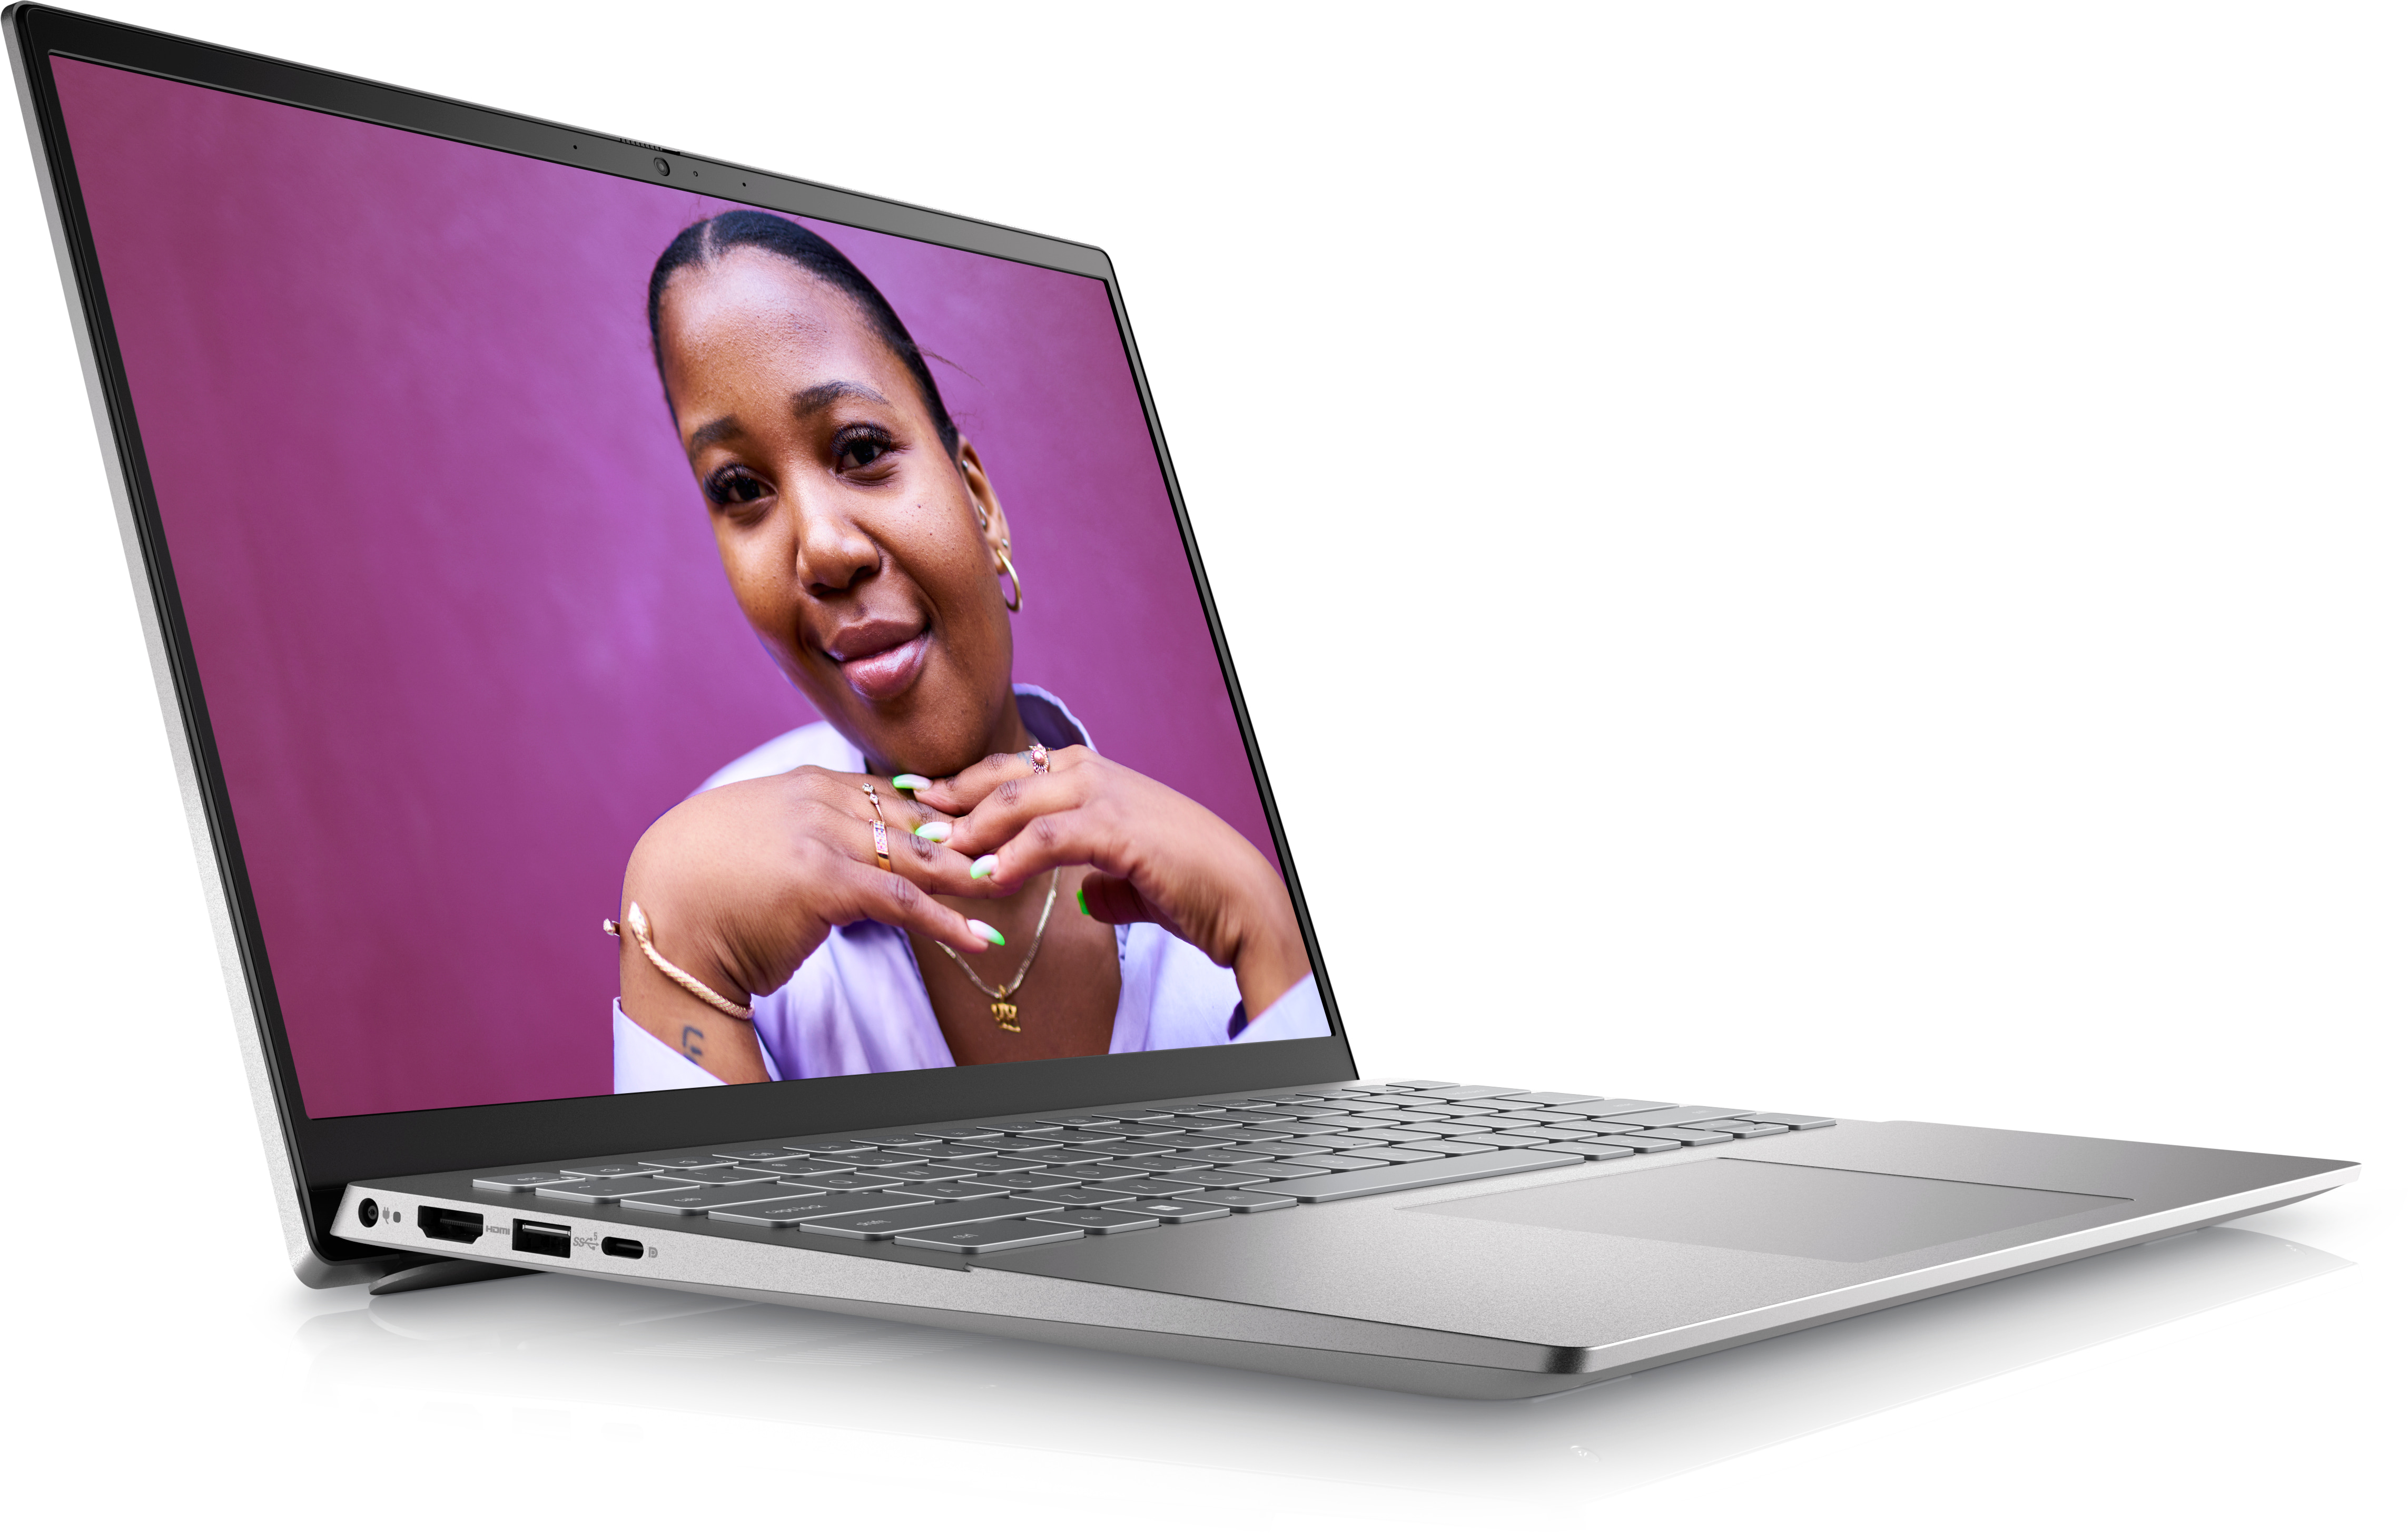 Inspiron 14-inch Laptop with AMD Mobile Processor | Dell USA